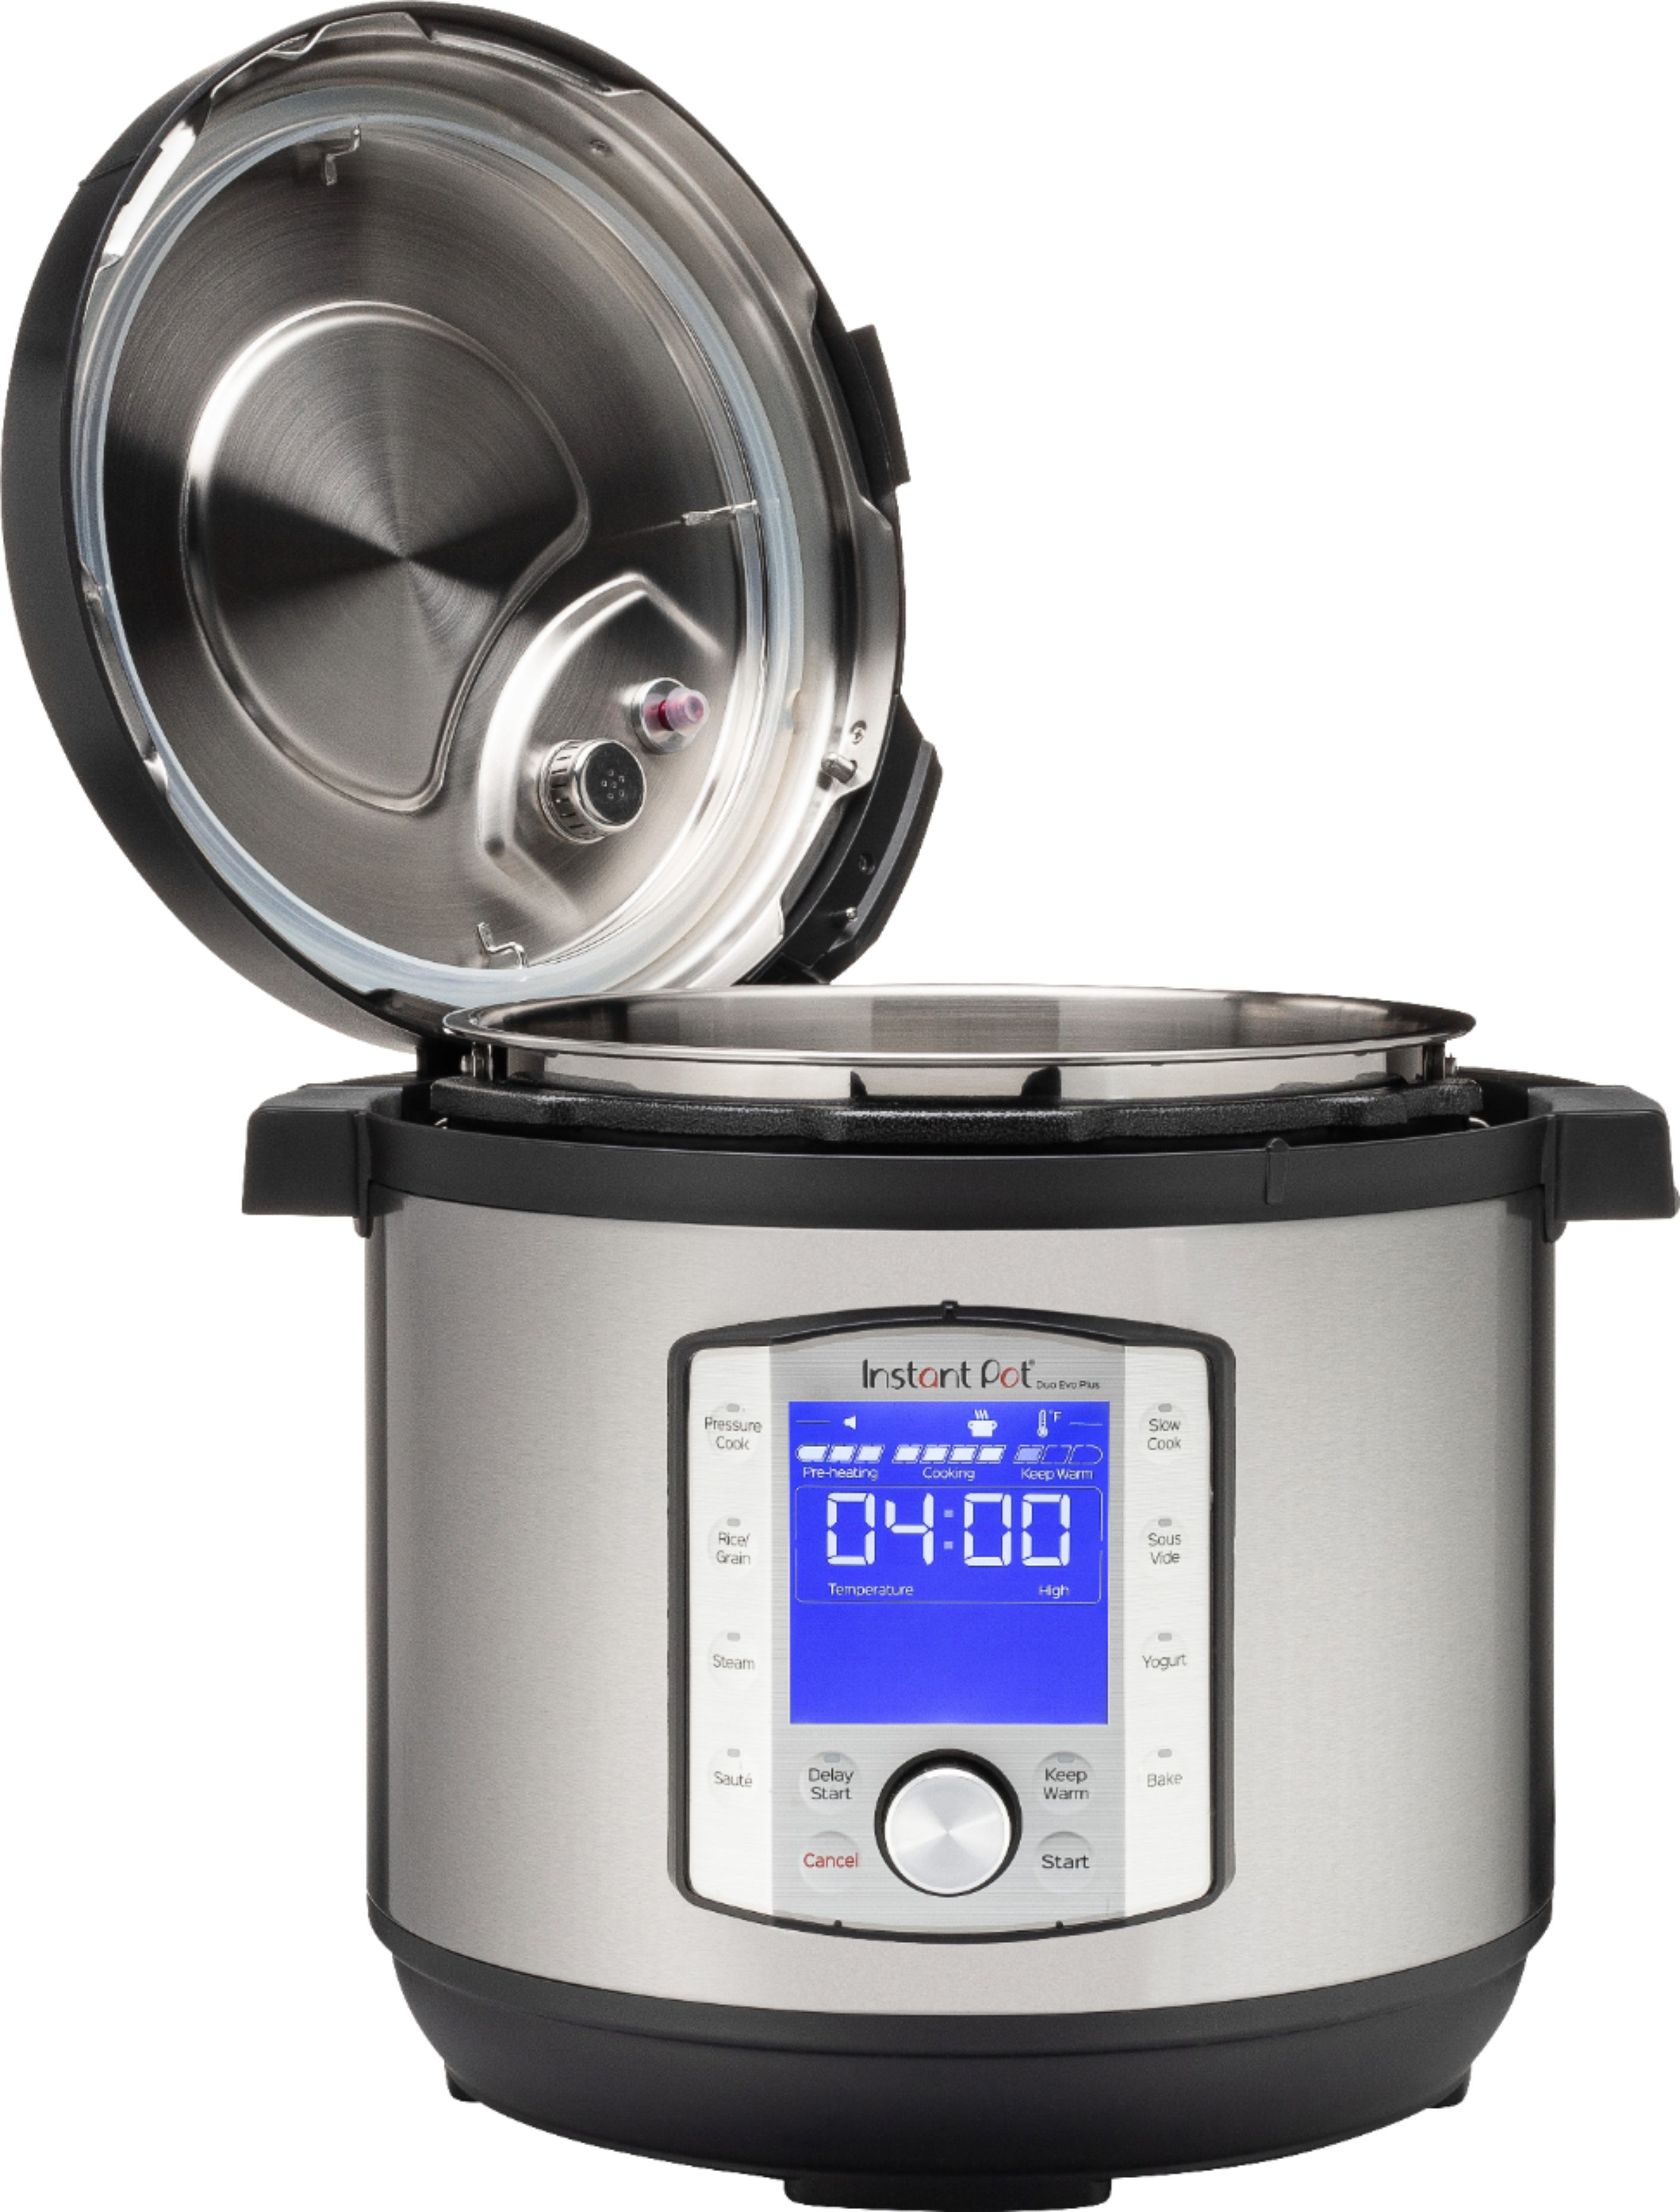 Where can I find replacement parts and accessories for Instant Pot Duo Plus?